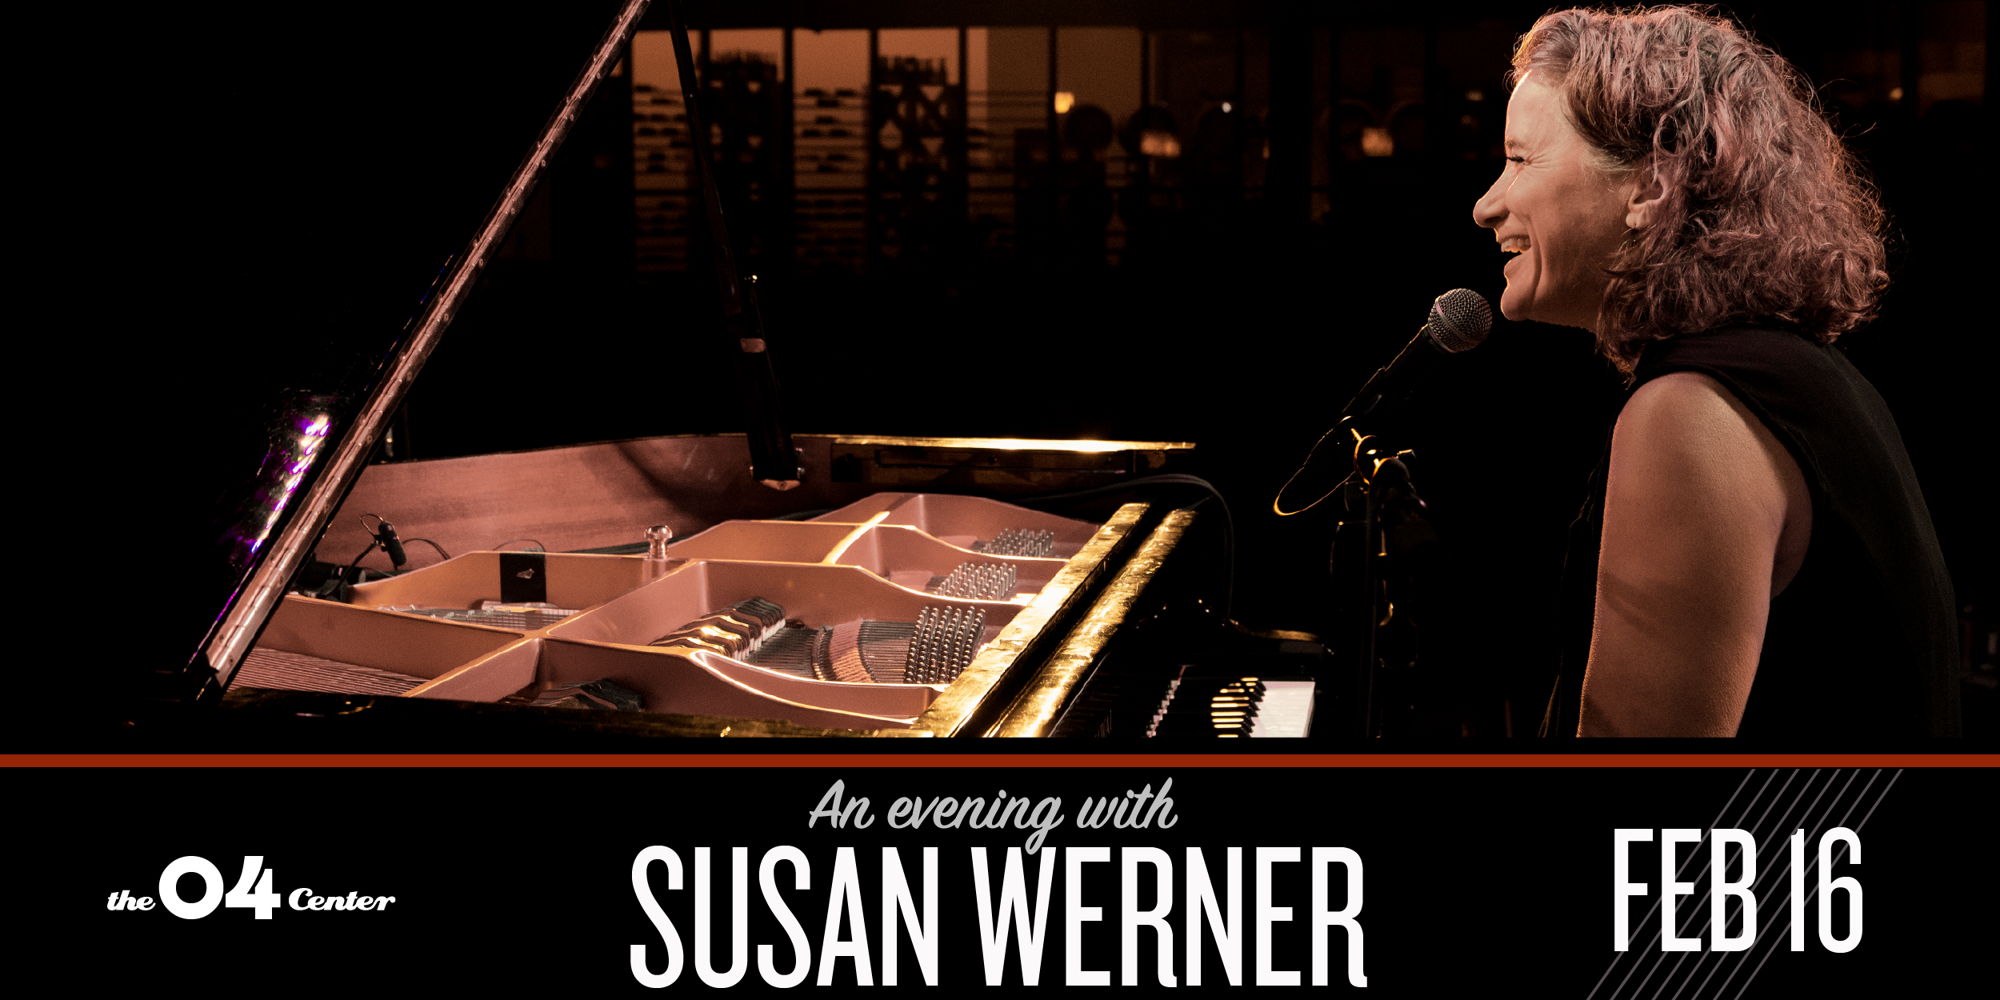 An evening with Susan Werner promotional image